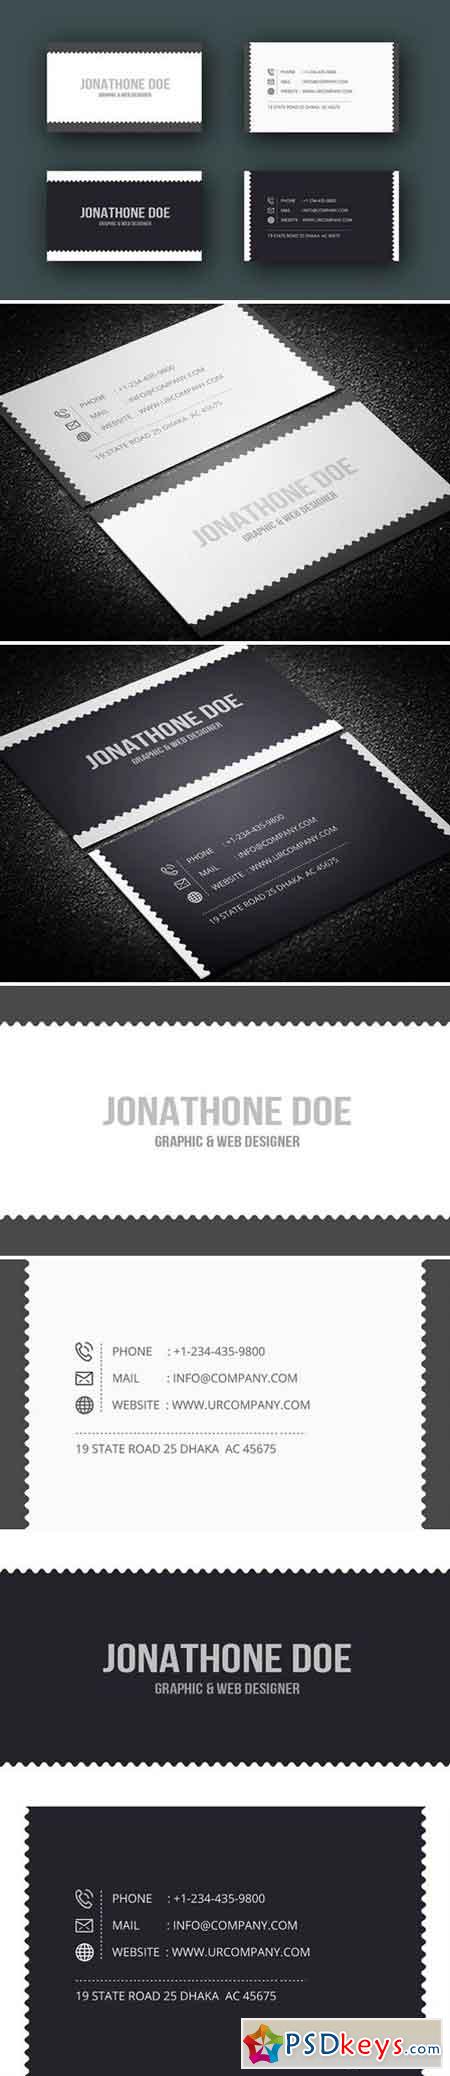 Business Card (2 version) 1274454